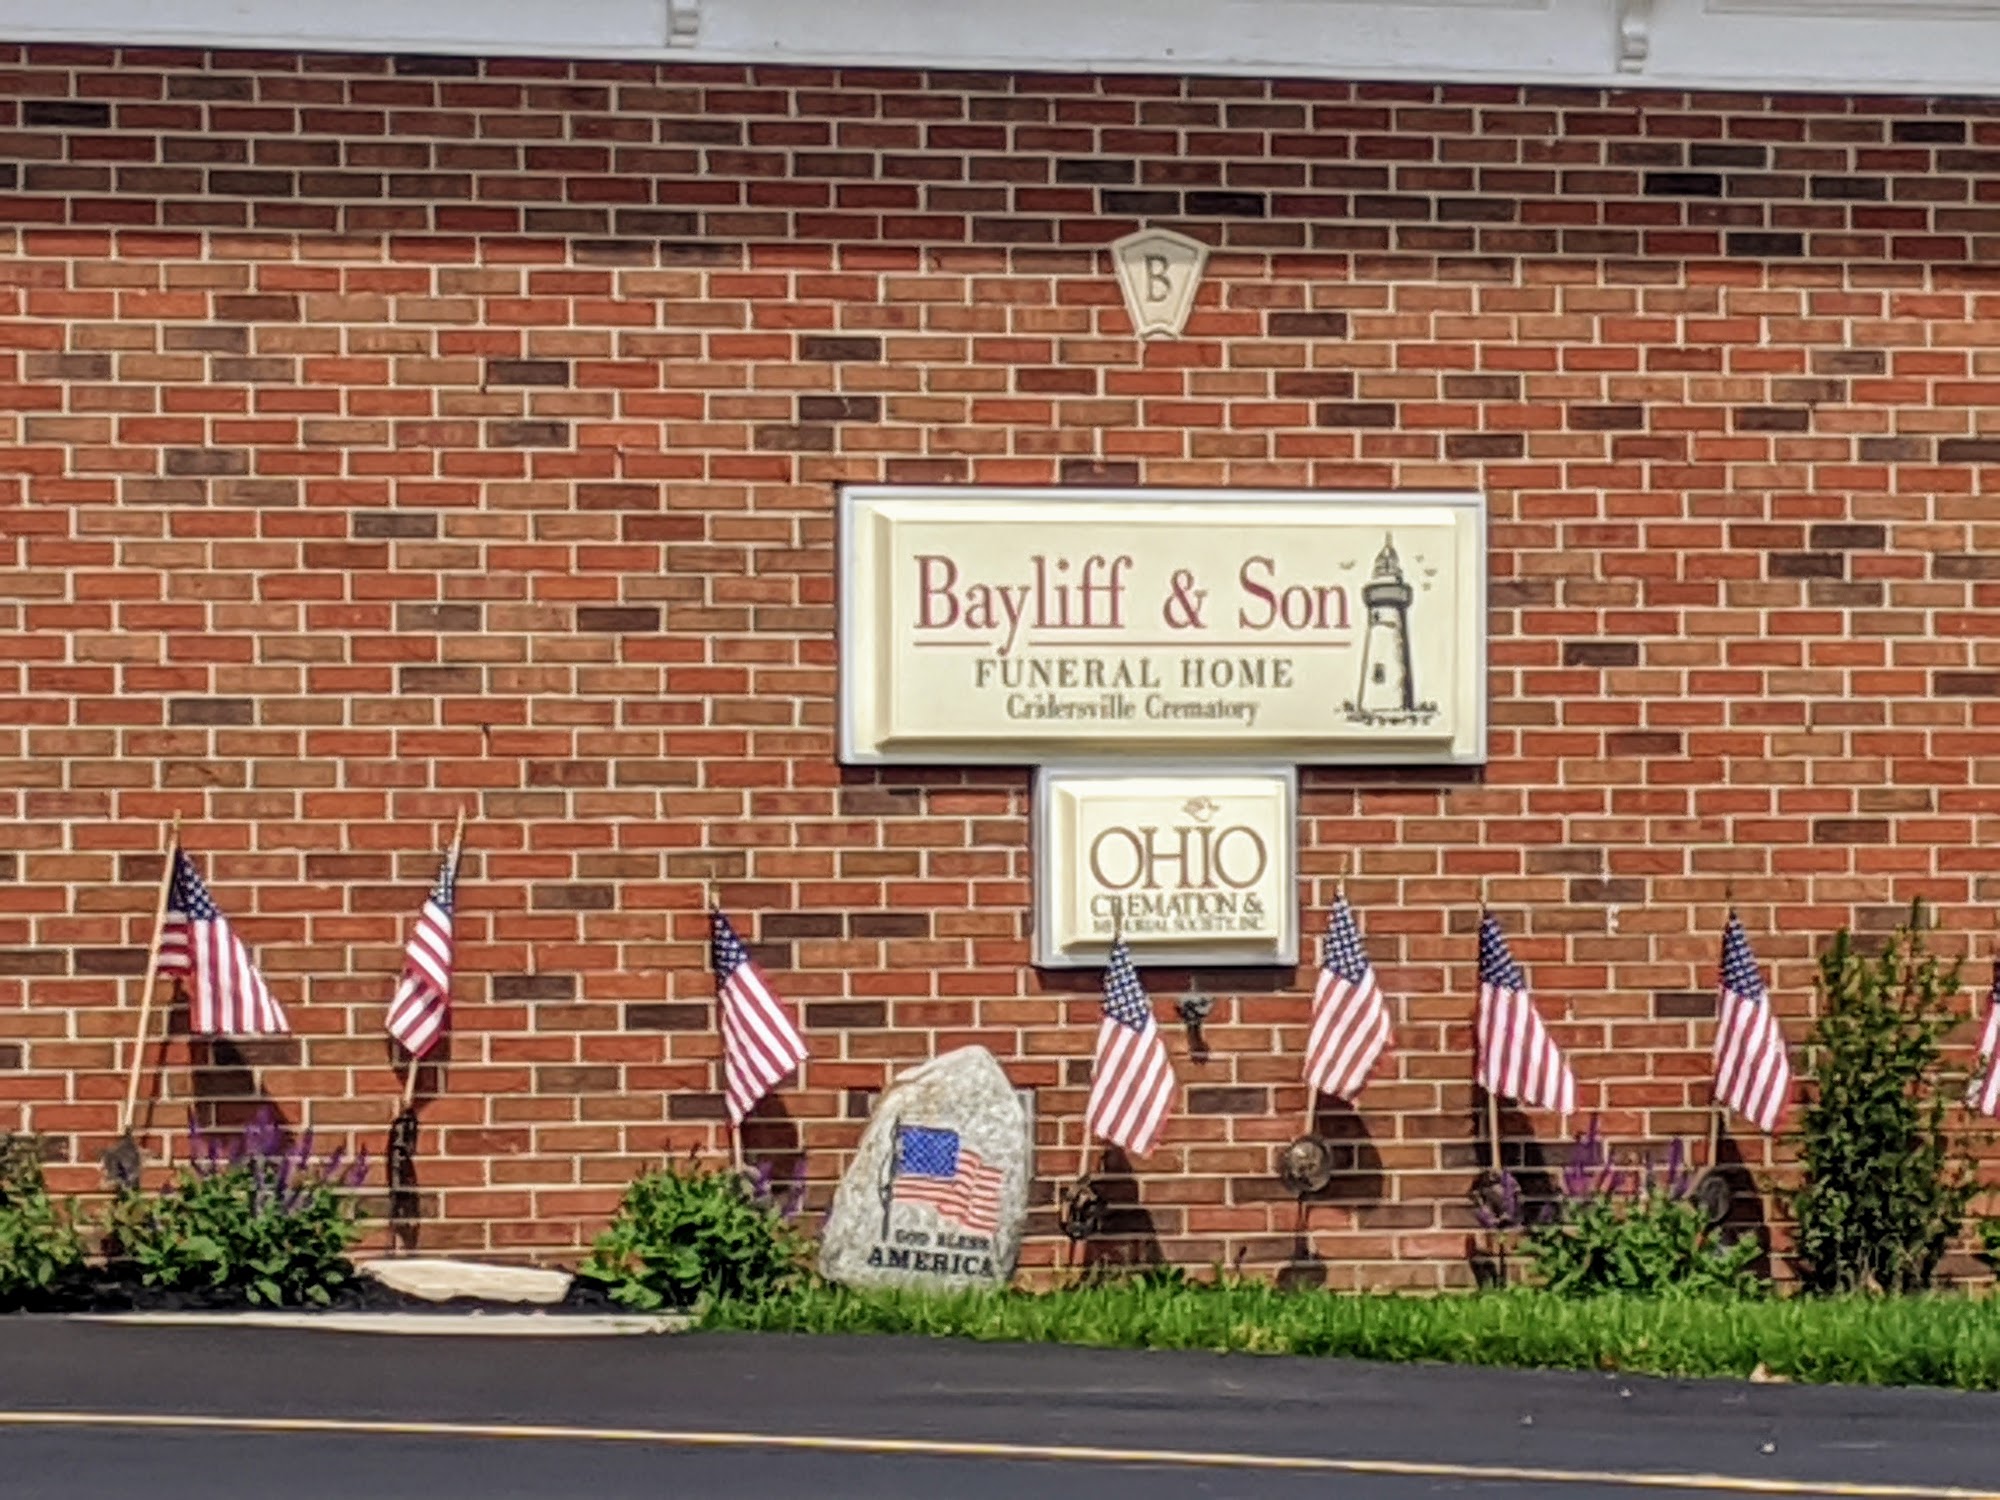 Bayliff & Son Funeral Home